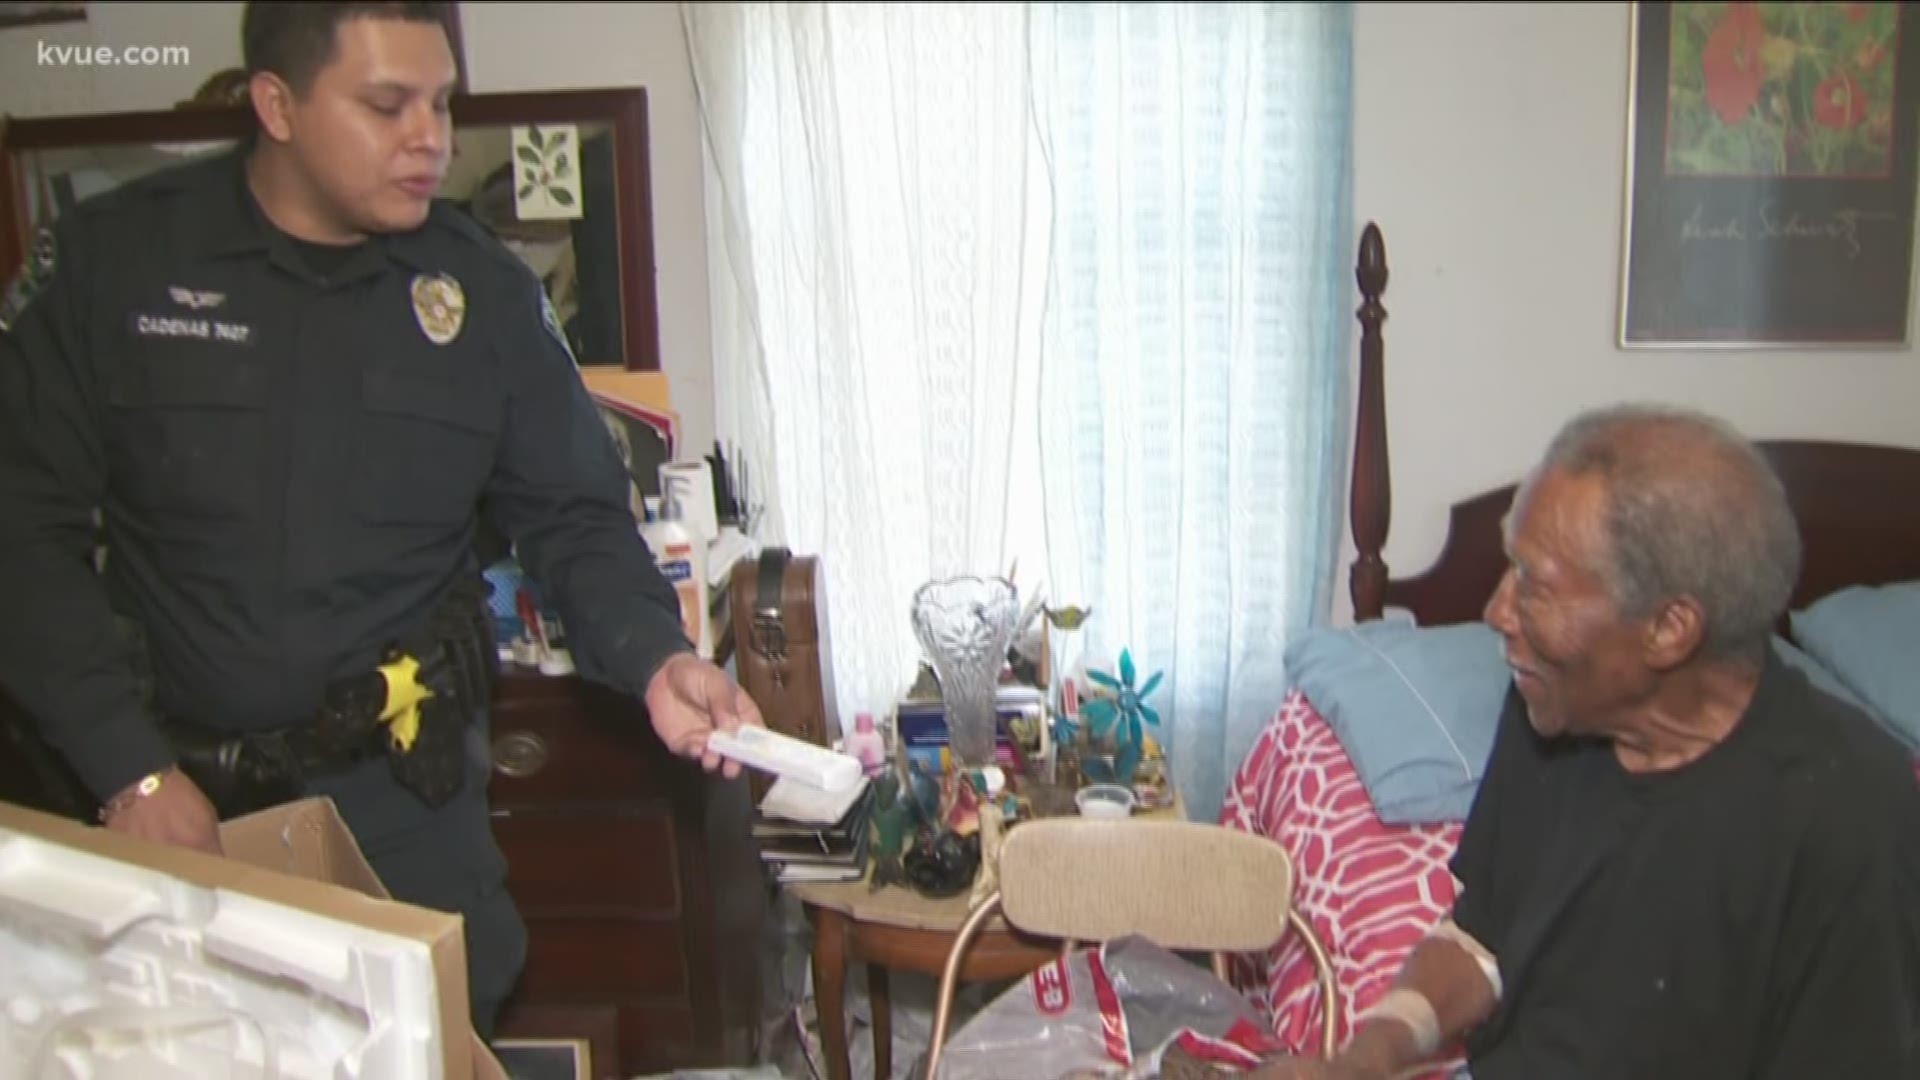 A World War II veteran in Austin will be sleeping a bit more warmly, thanks to the help of two Austin police officers and several organizations.